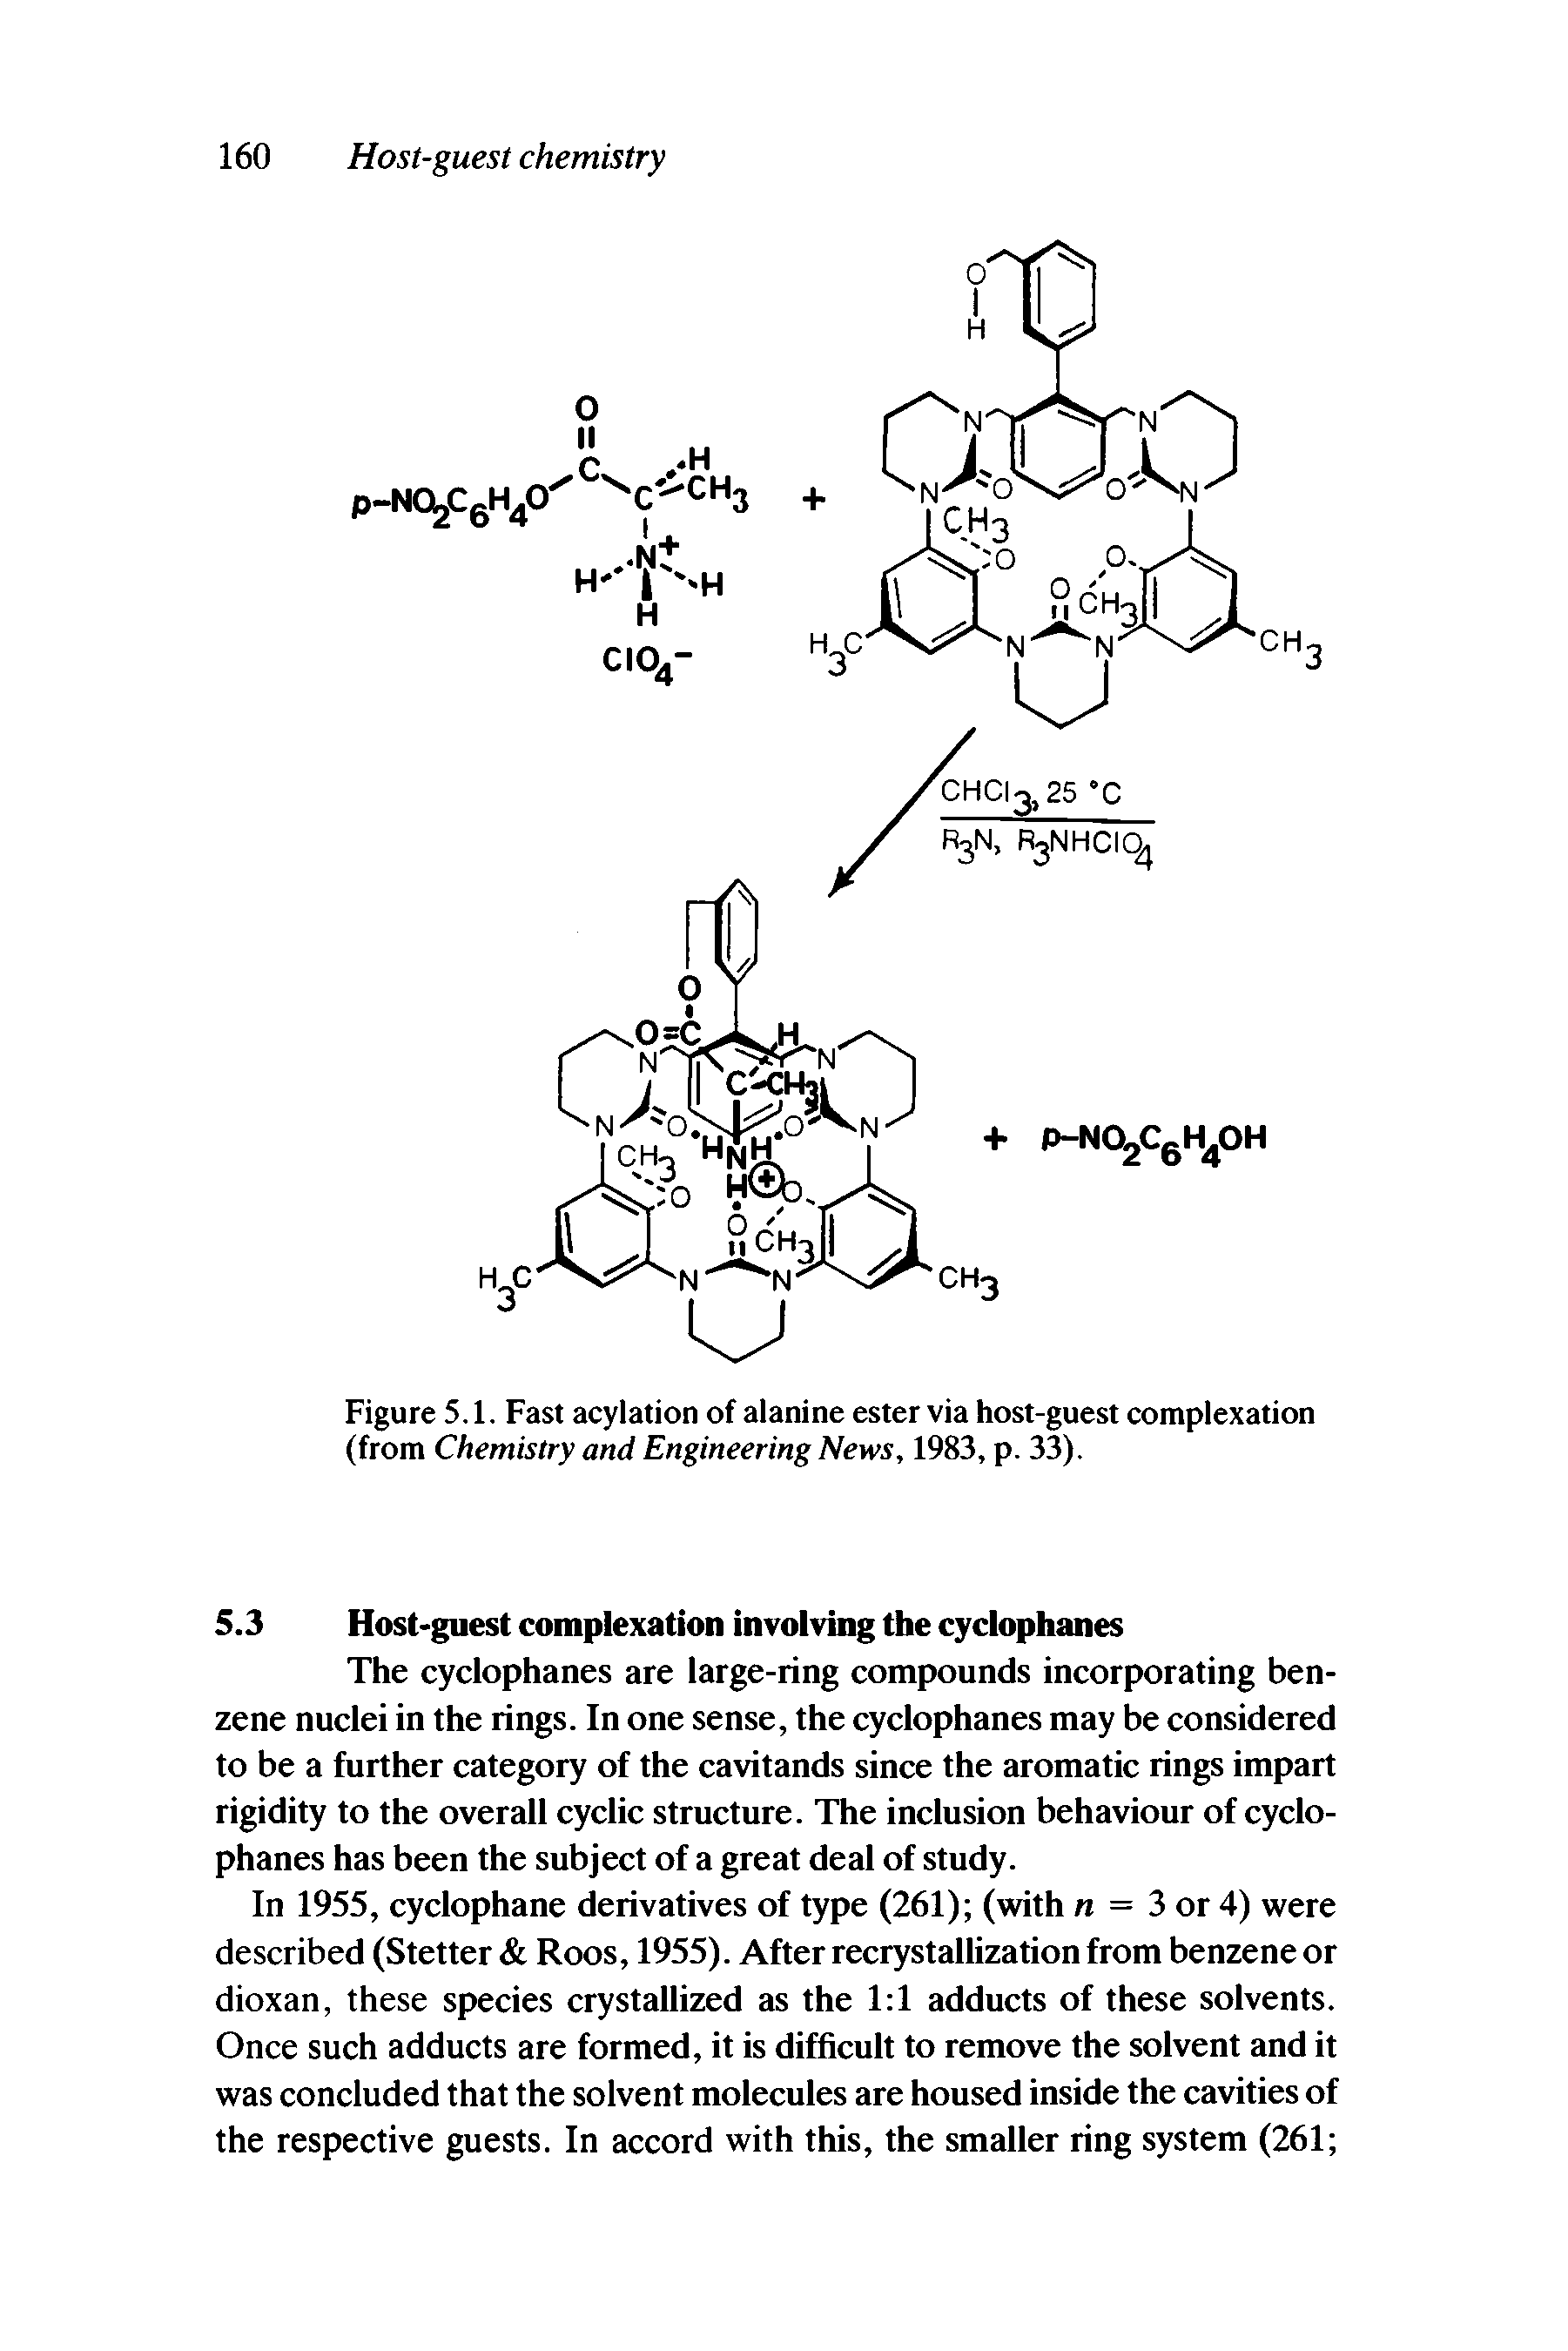 Figure 5.1. Fast acylation of alanine ester via host-guest complexation (from Chemistry and Engineering News, 1983, p. 33).